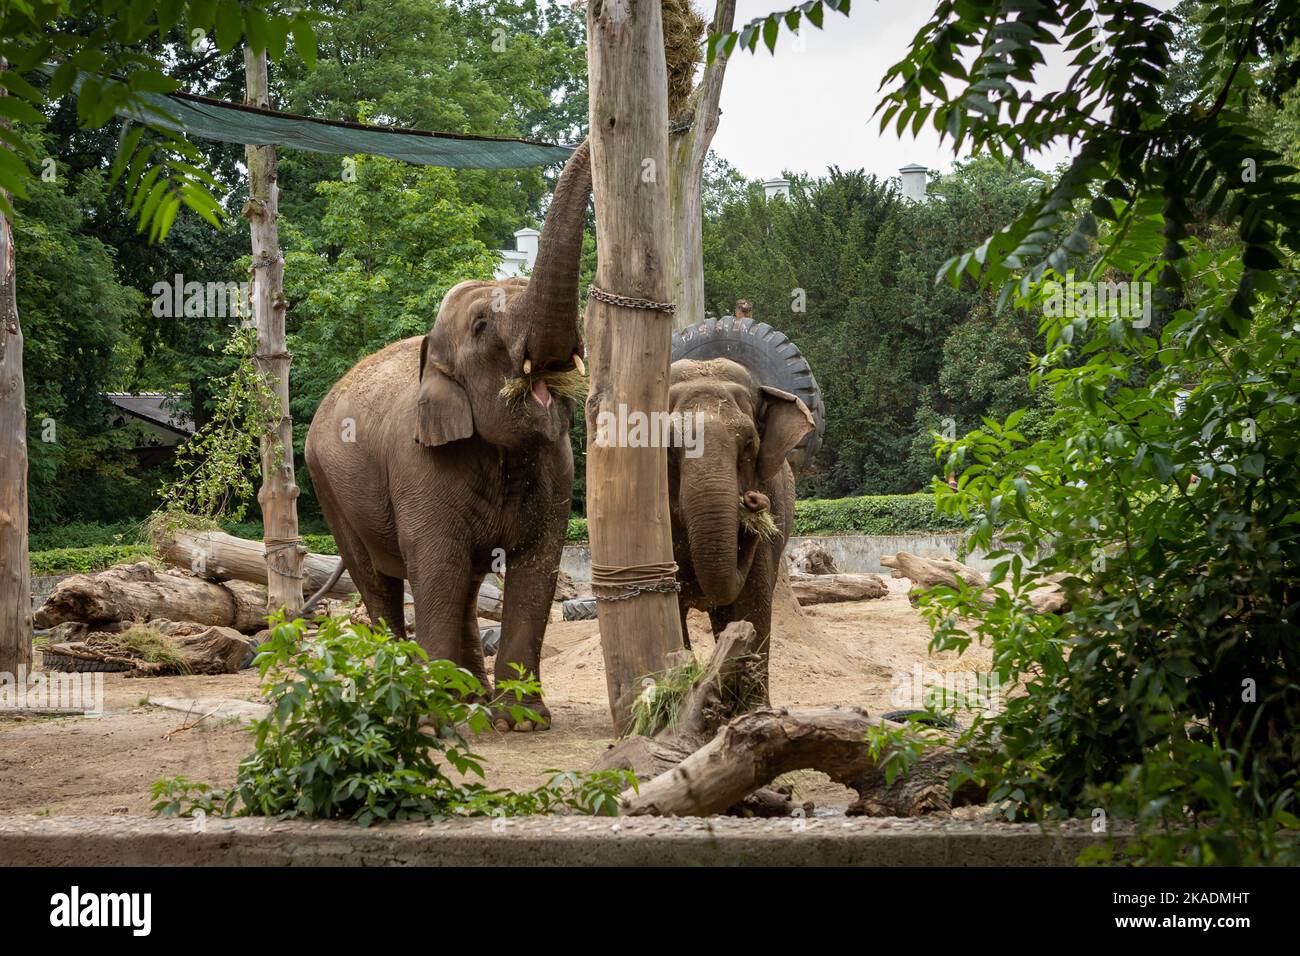 Two indian elephants (Elephas maximus indicus) eating hay in the zoological garden in Wroclaw, Poland. Stock Photo